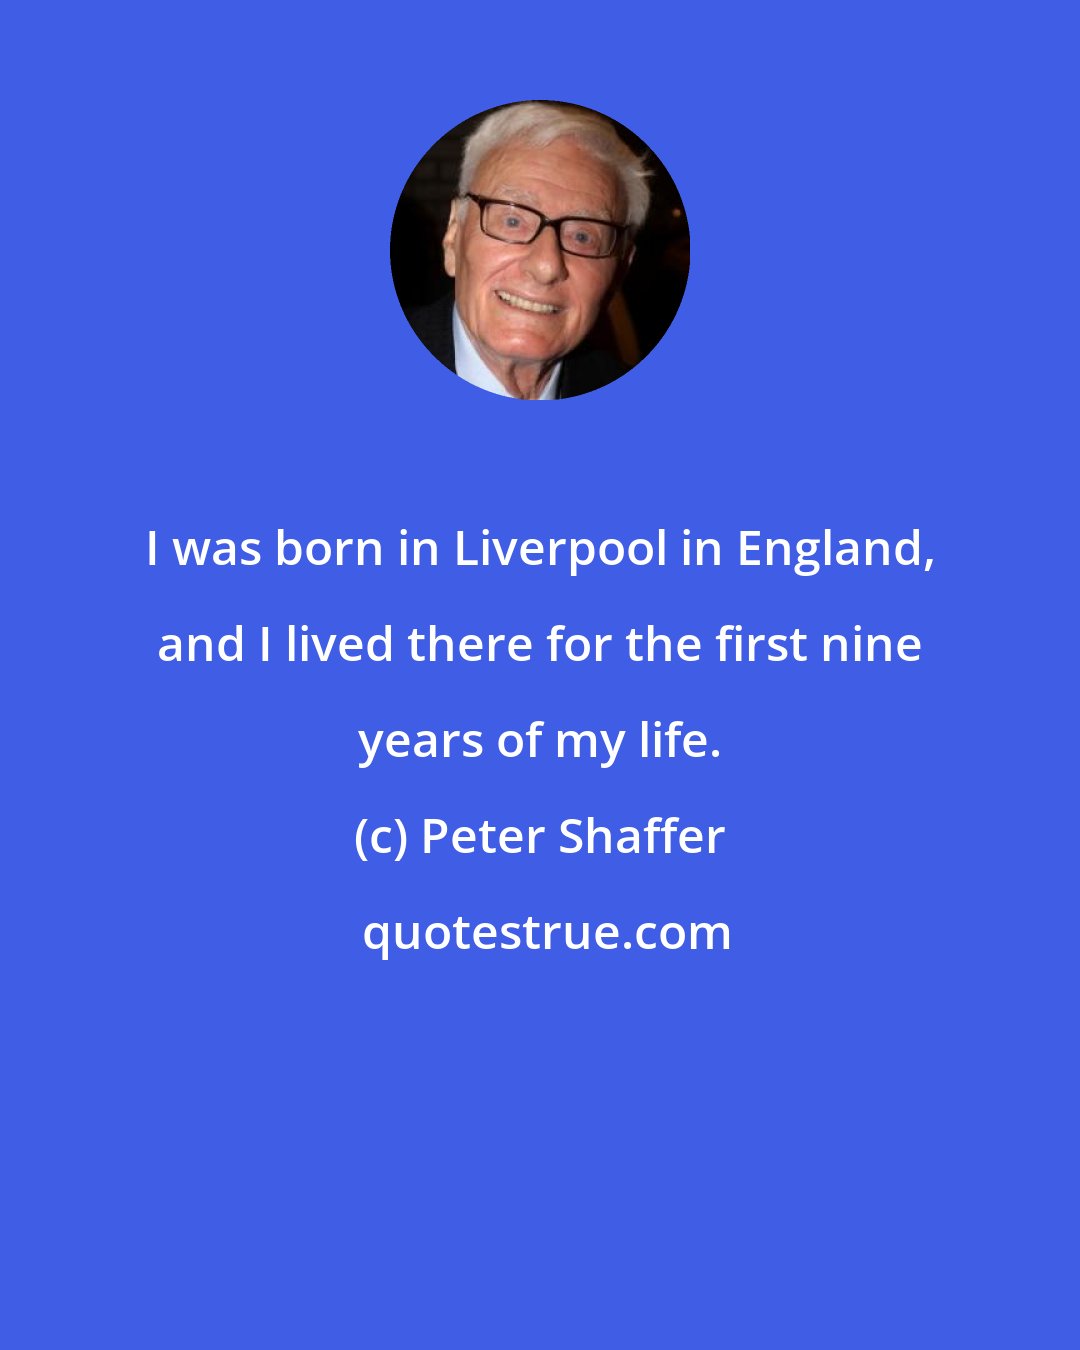 Peter Shaffer: I was born in Liverpool in England, and I lived there for the first nine years of my life.